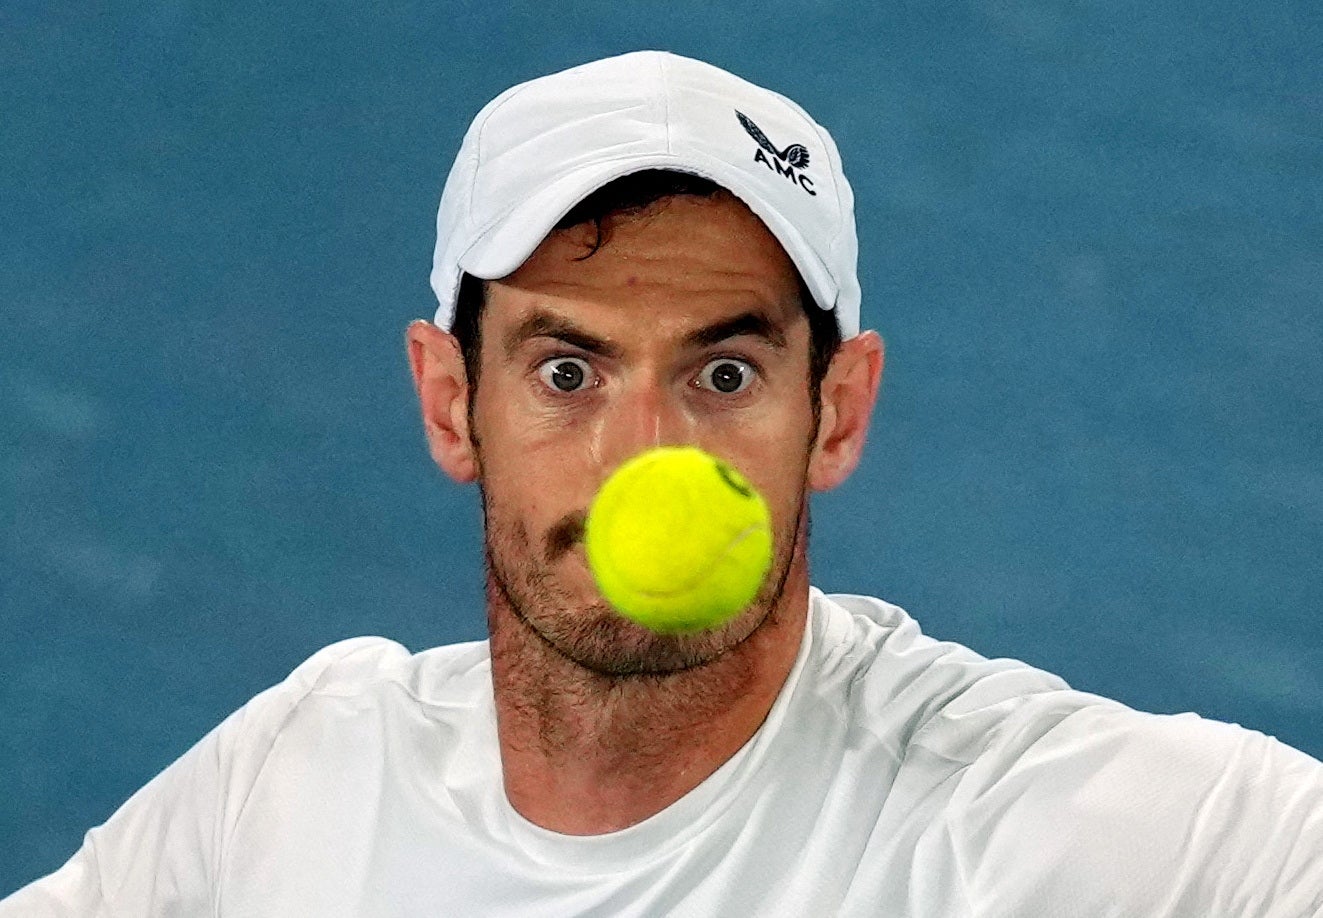 Andy Murray in action during his second round match against Thanasi Kokkinakis at the Australian Open